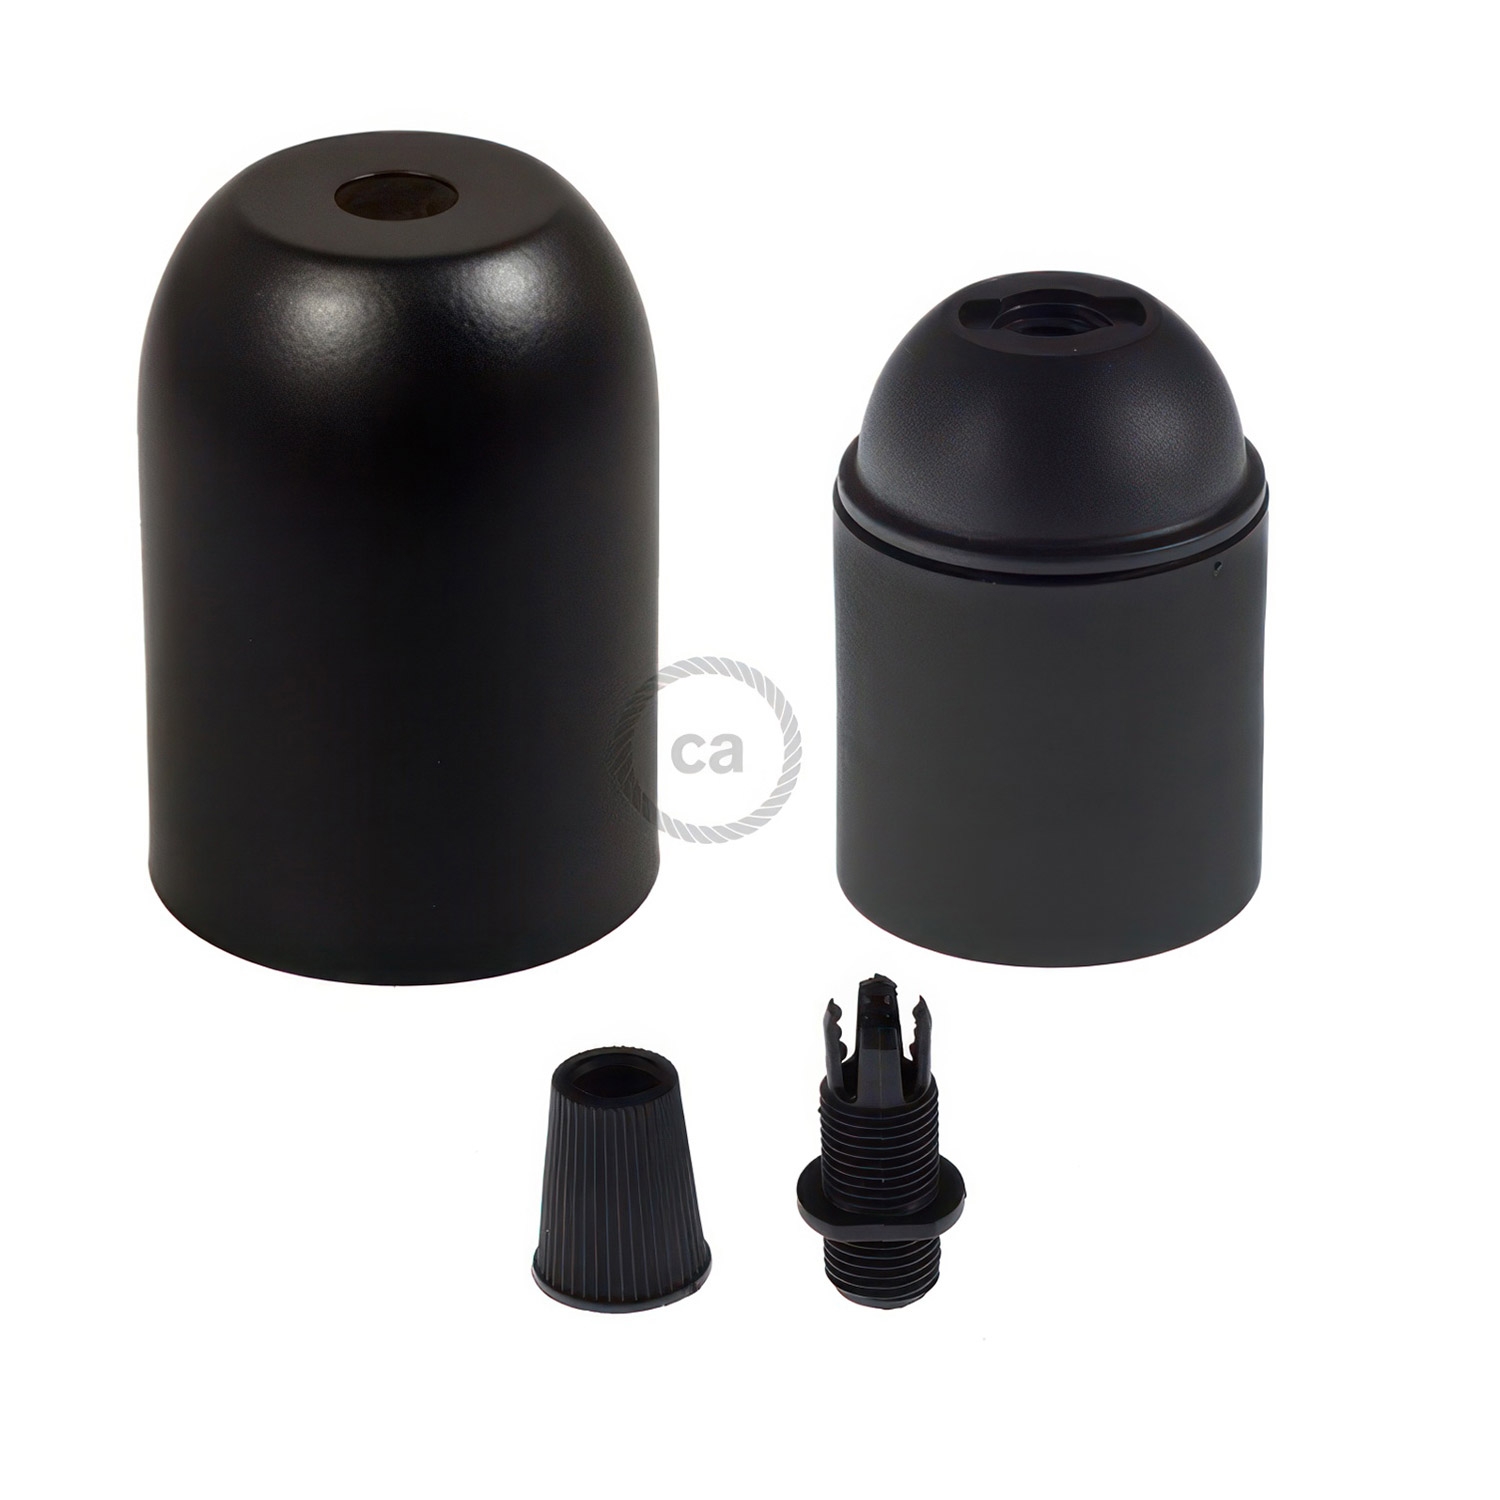 Rounded painted metal E27 lamp holder kit